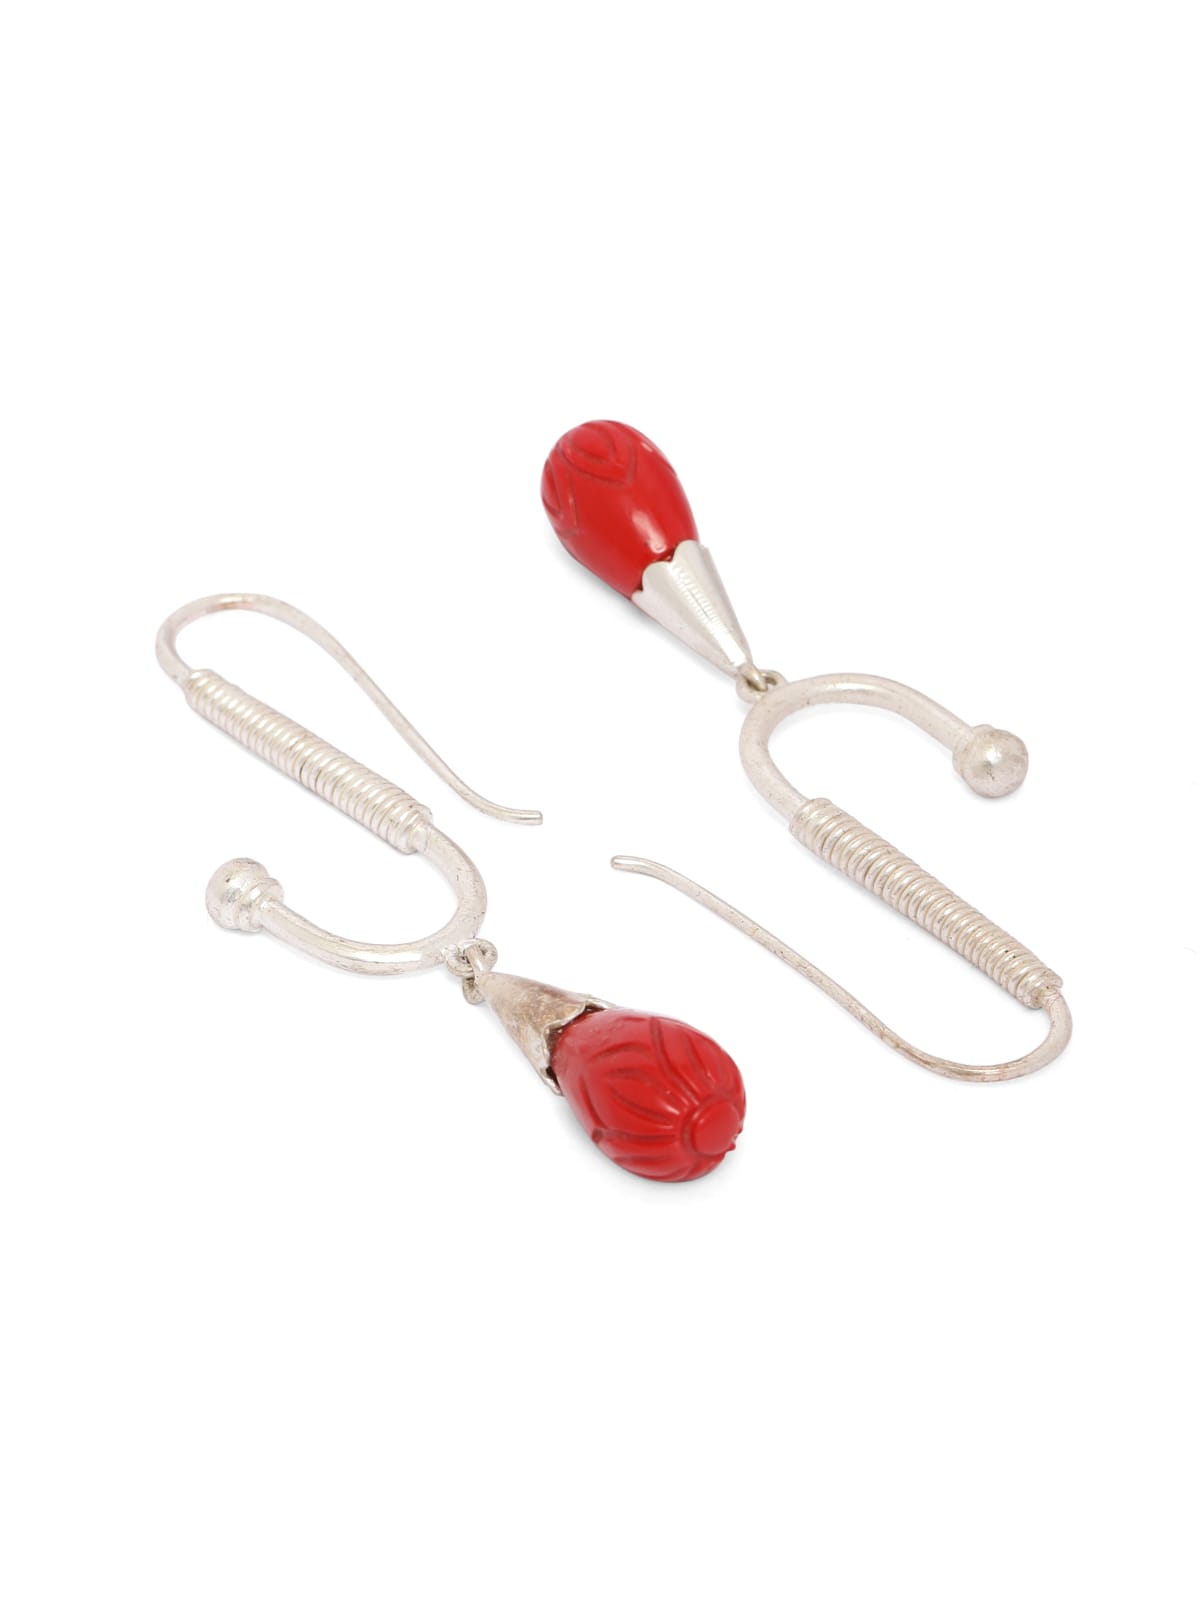 Handcrafted Sterling Silver, Reconstituted coral carved.